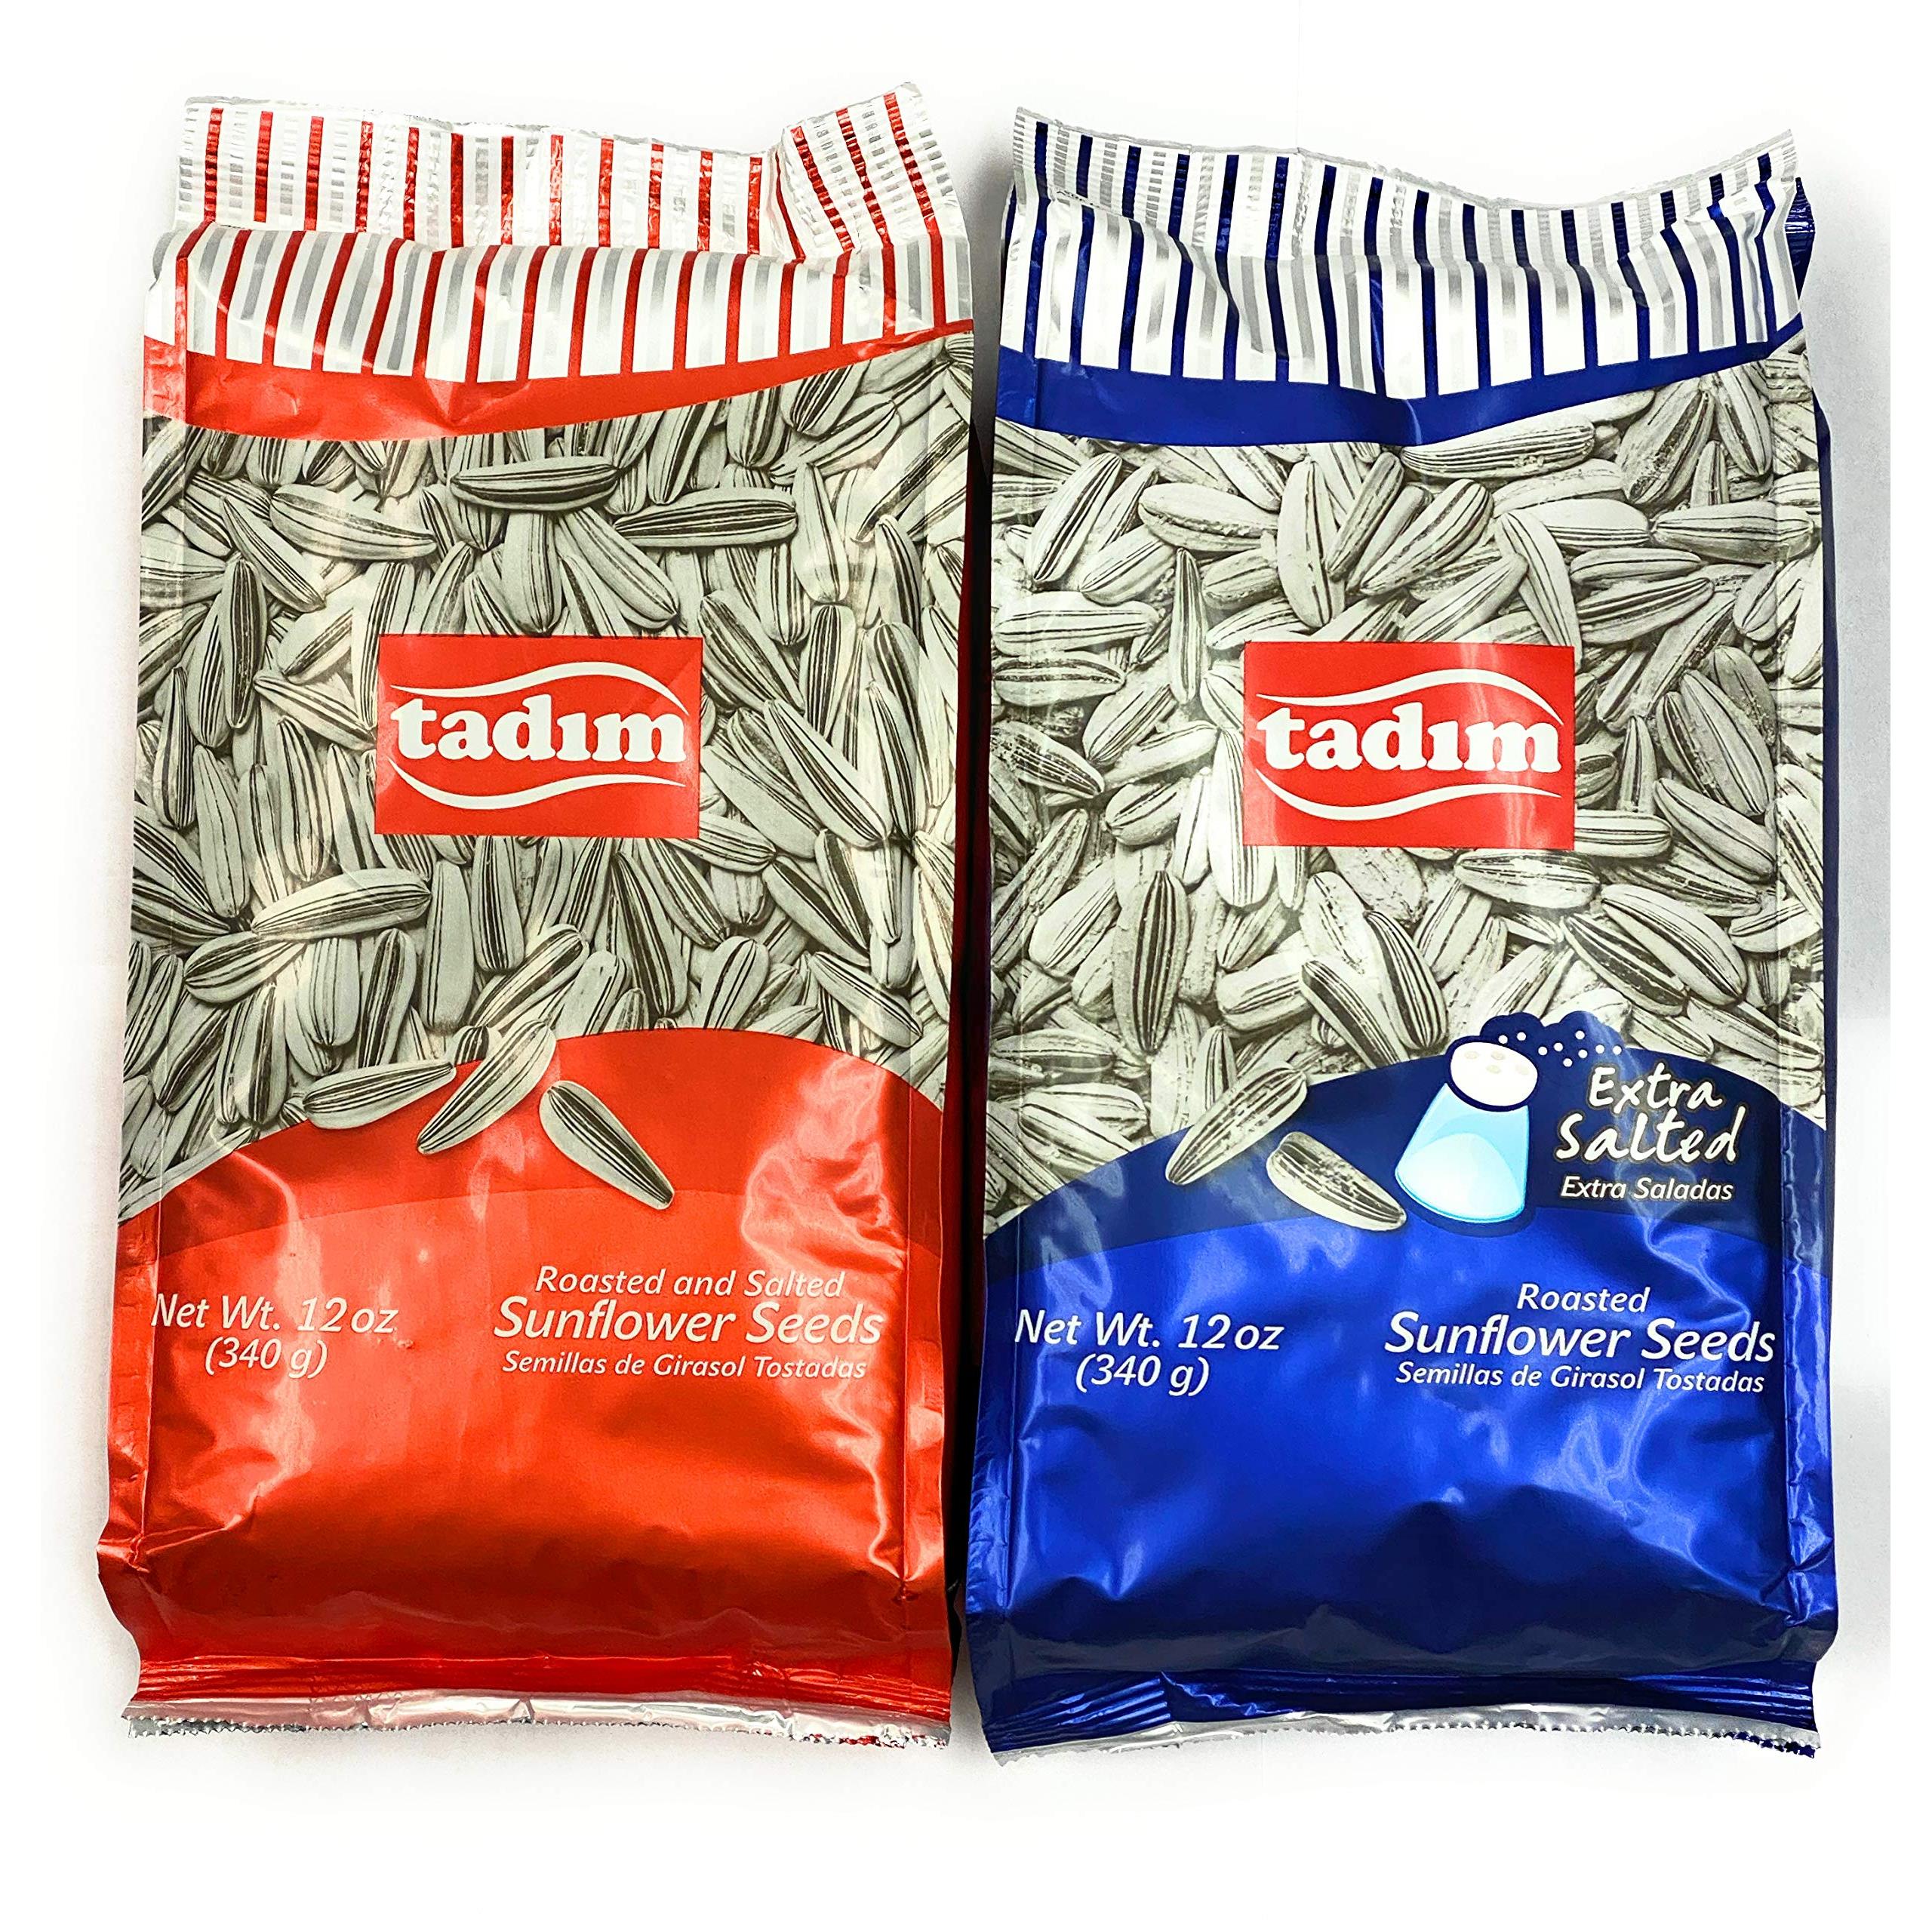 Tadim Salted and Extra Salted Sunflower Seeds 12 oz Pack of 2 From Germany